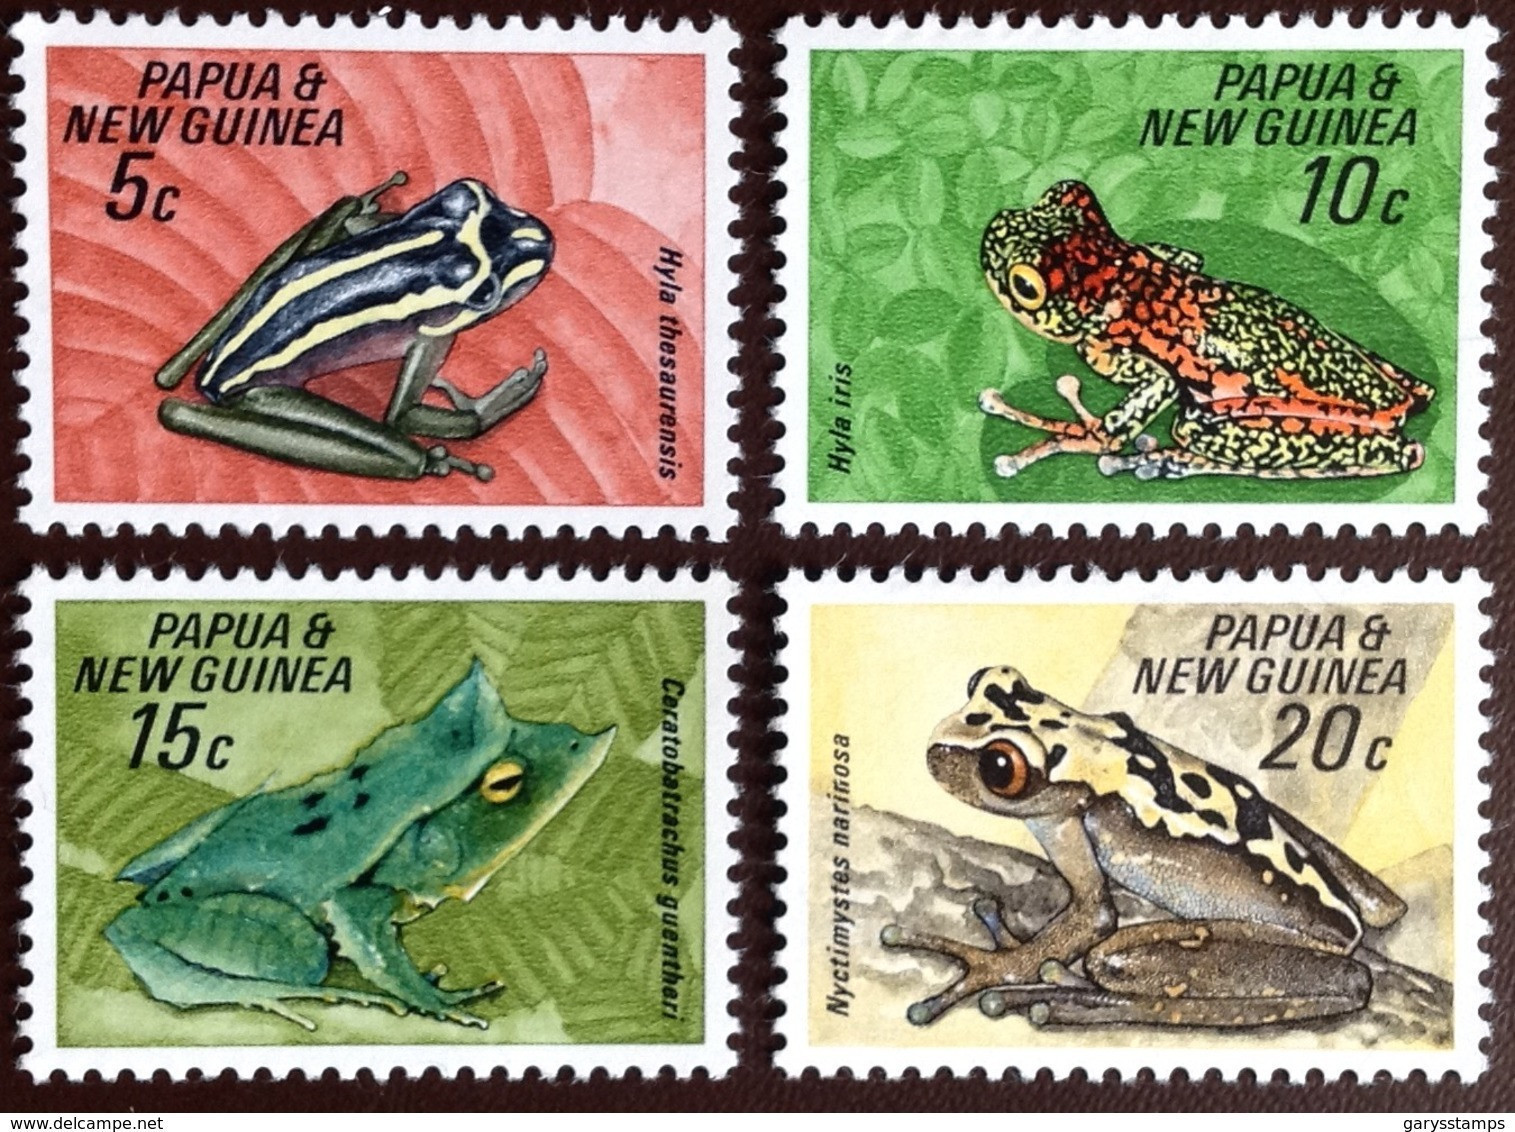 Papua New Guinea 1968 Reptiles Frogs MNH - Frogs